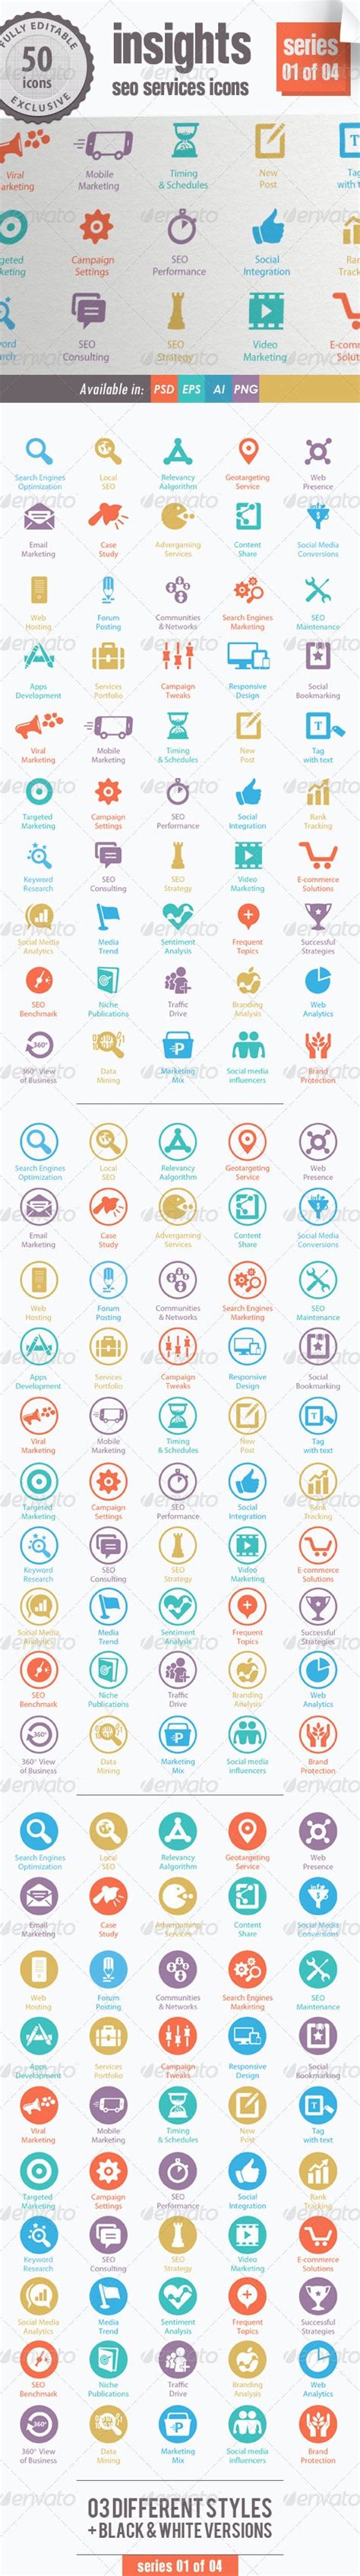 Insights Seo Services Icons Series 01 Of 04 By Kh2838 Graphicriver